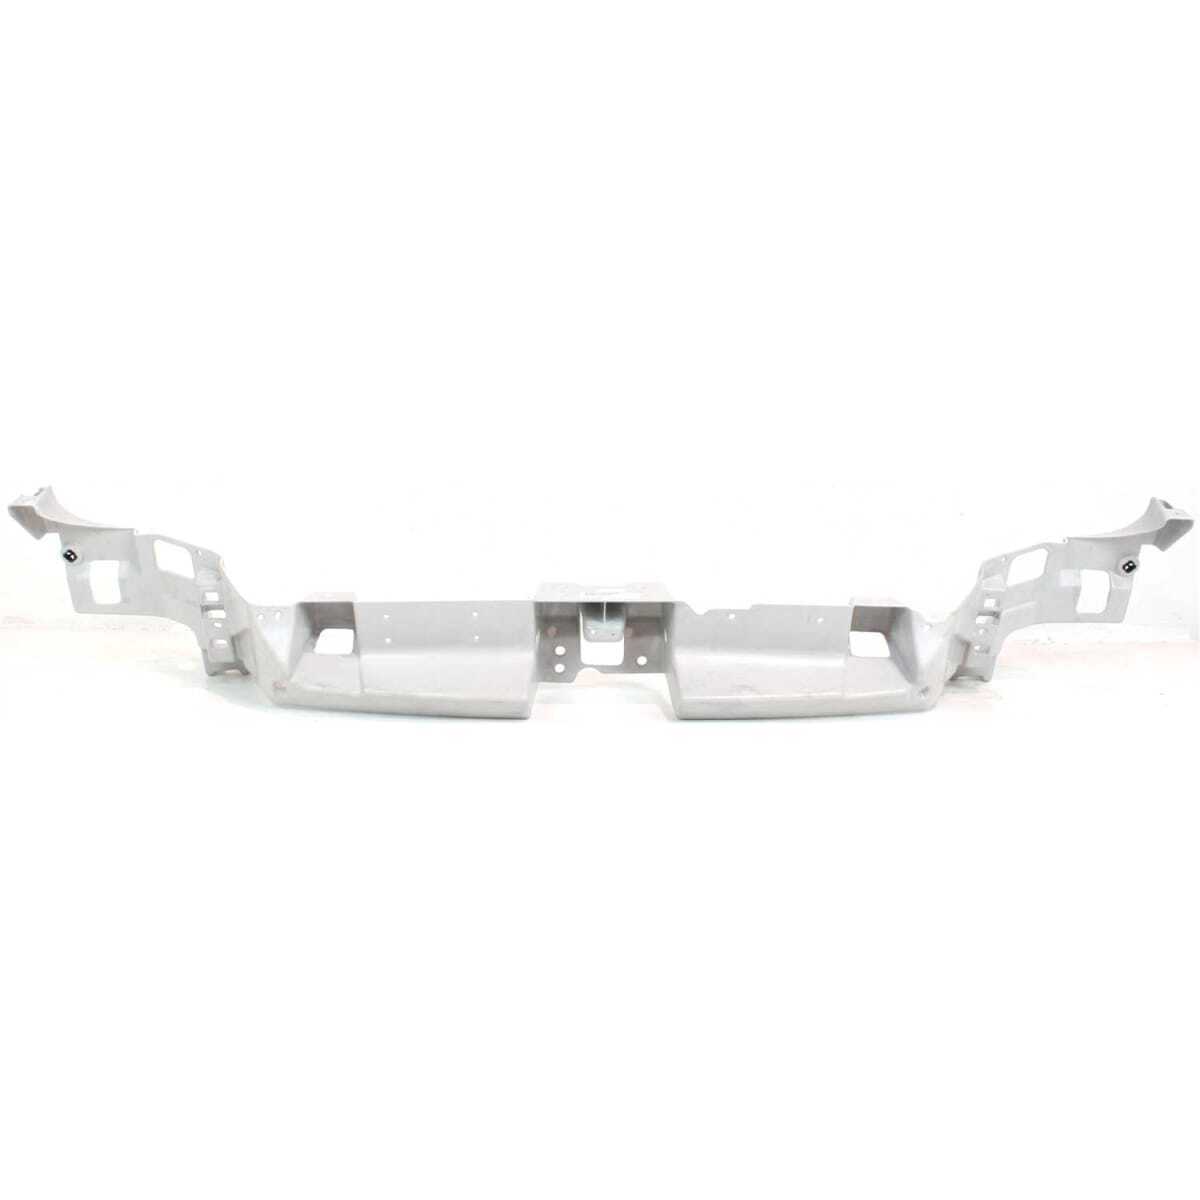 For 2002-2007 Buick Rendezvous Header Panel